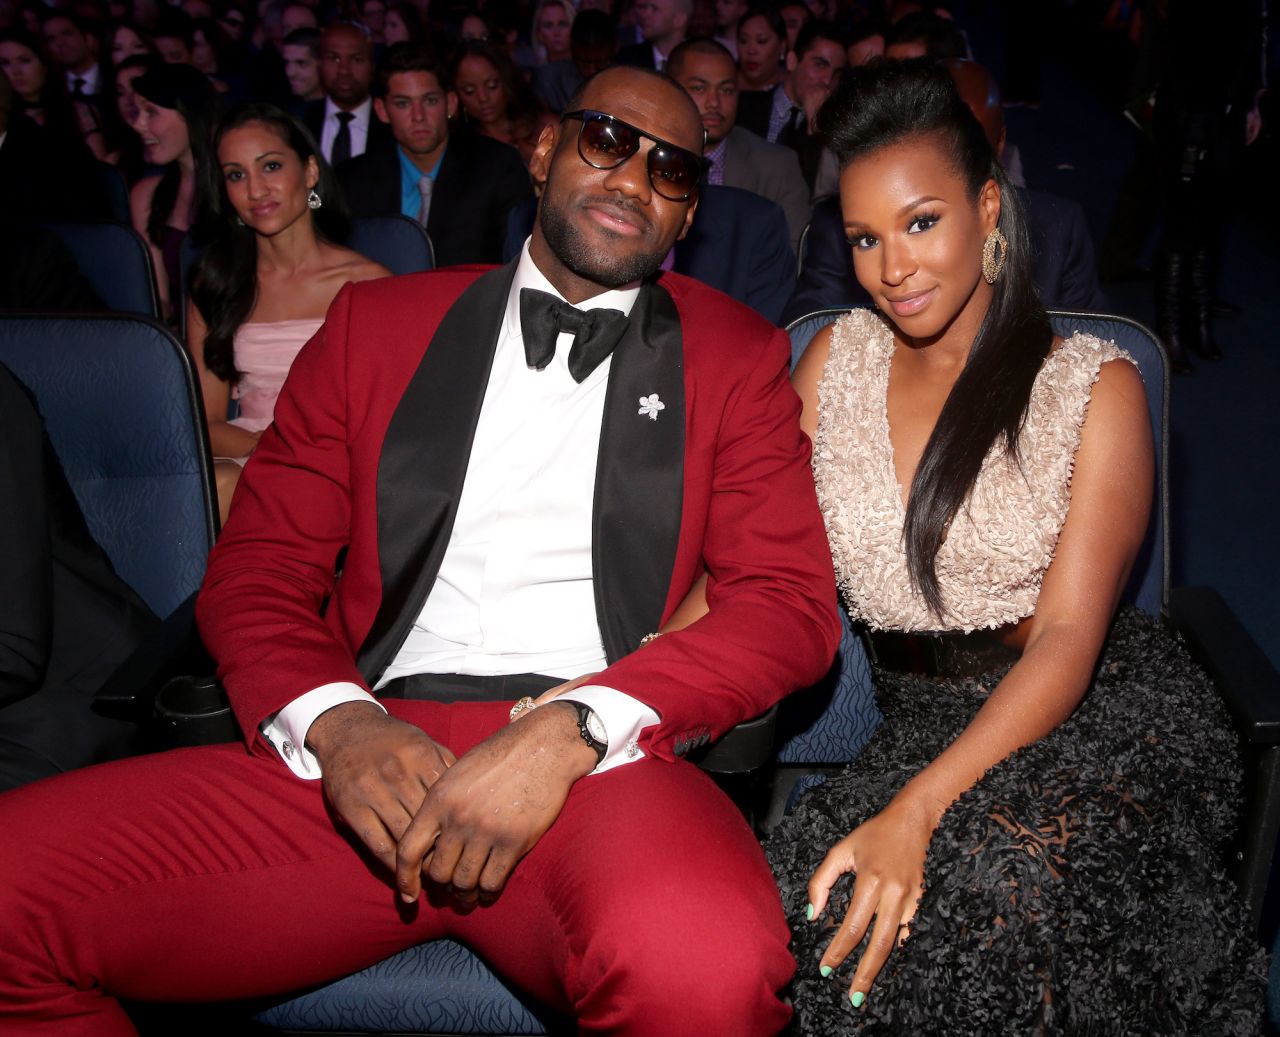 James and Savannah Brinson attend the 2013 ESPY Awards in July 2013. The two married in September of that year. They have three children together: Bronny, Bryce and Zhuri.